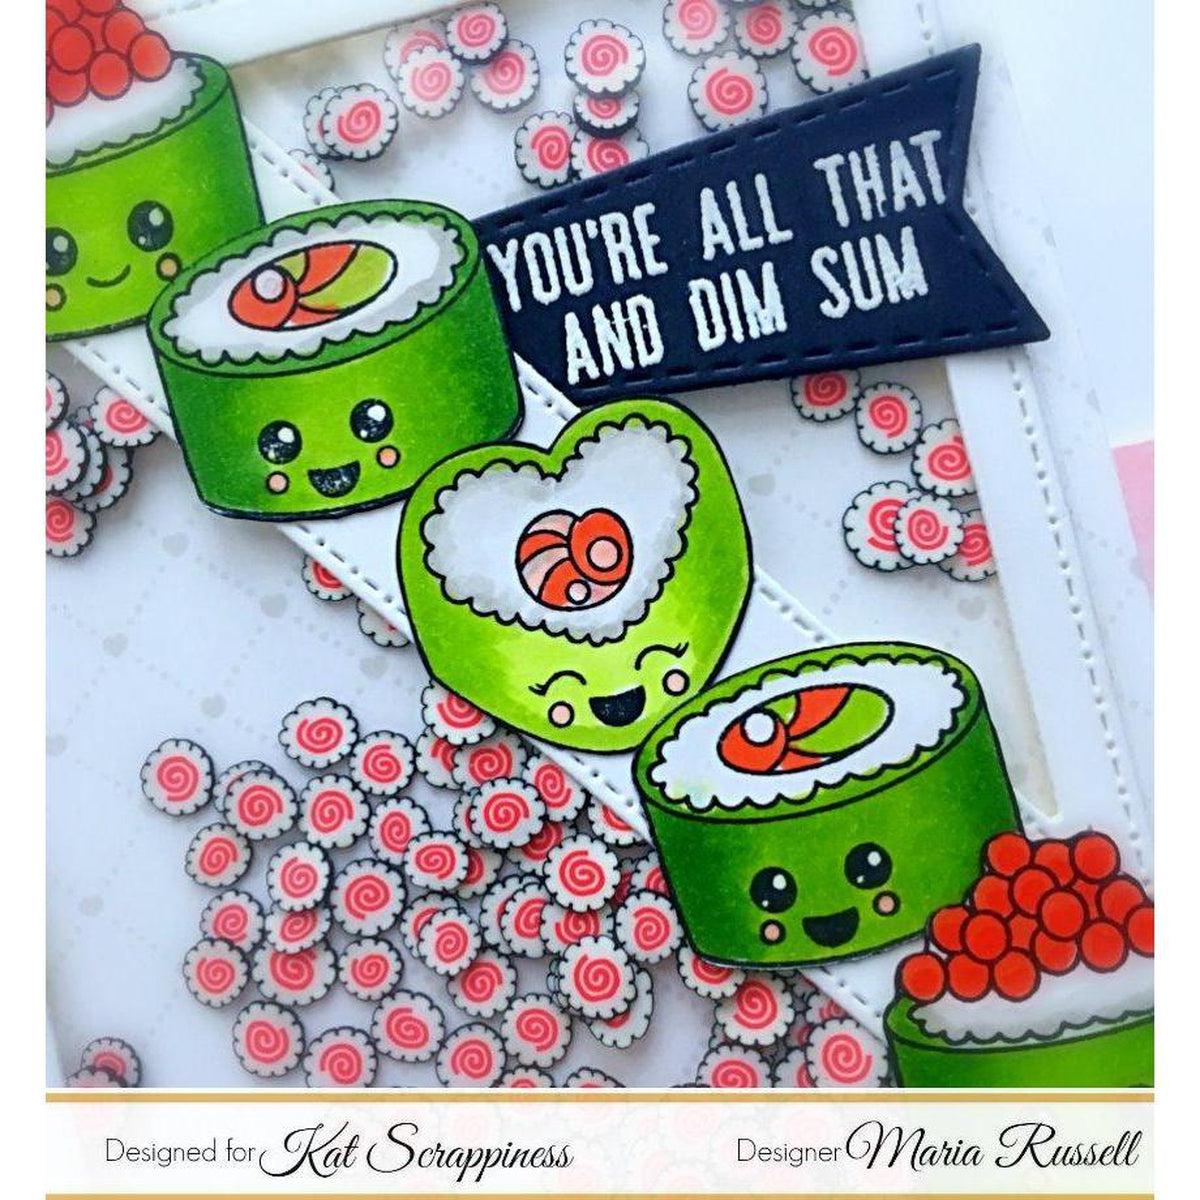 Sushi Sprinkles by Kat Scrappiness - Kat Scrappiness